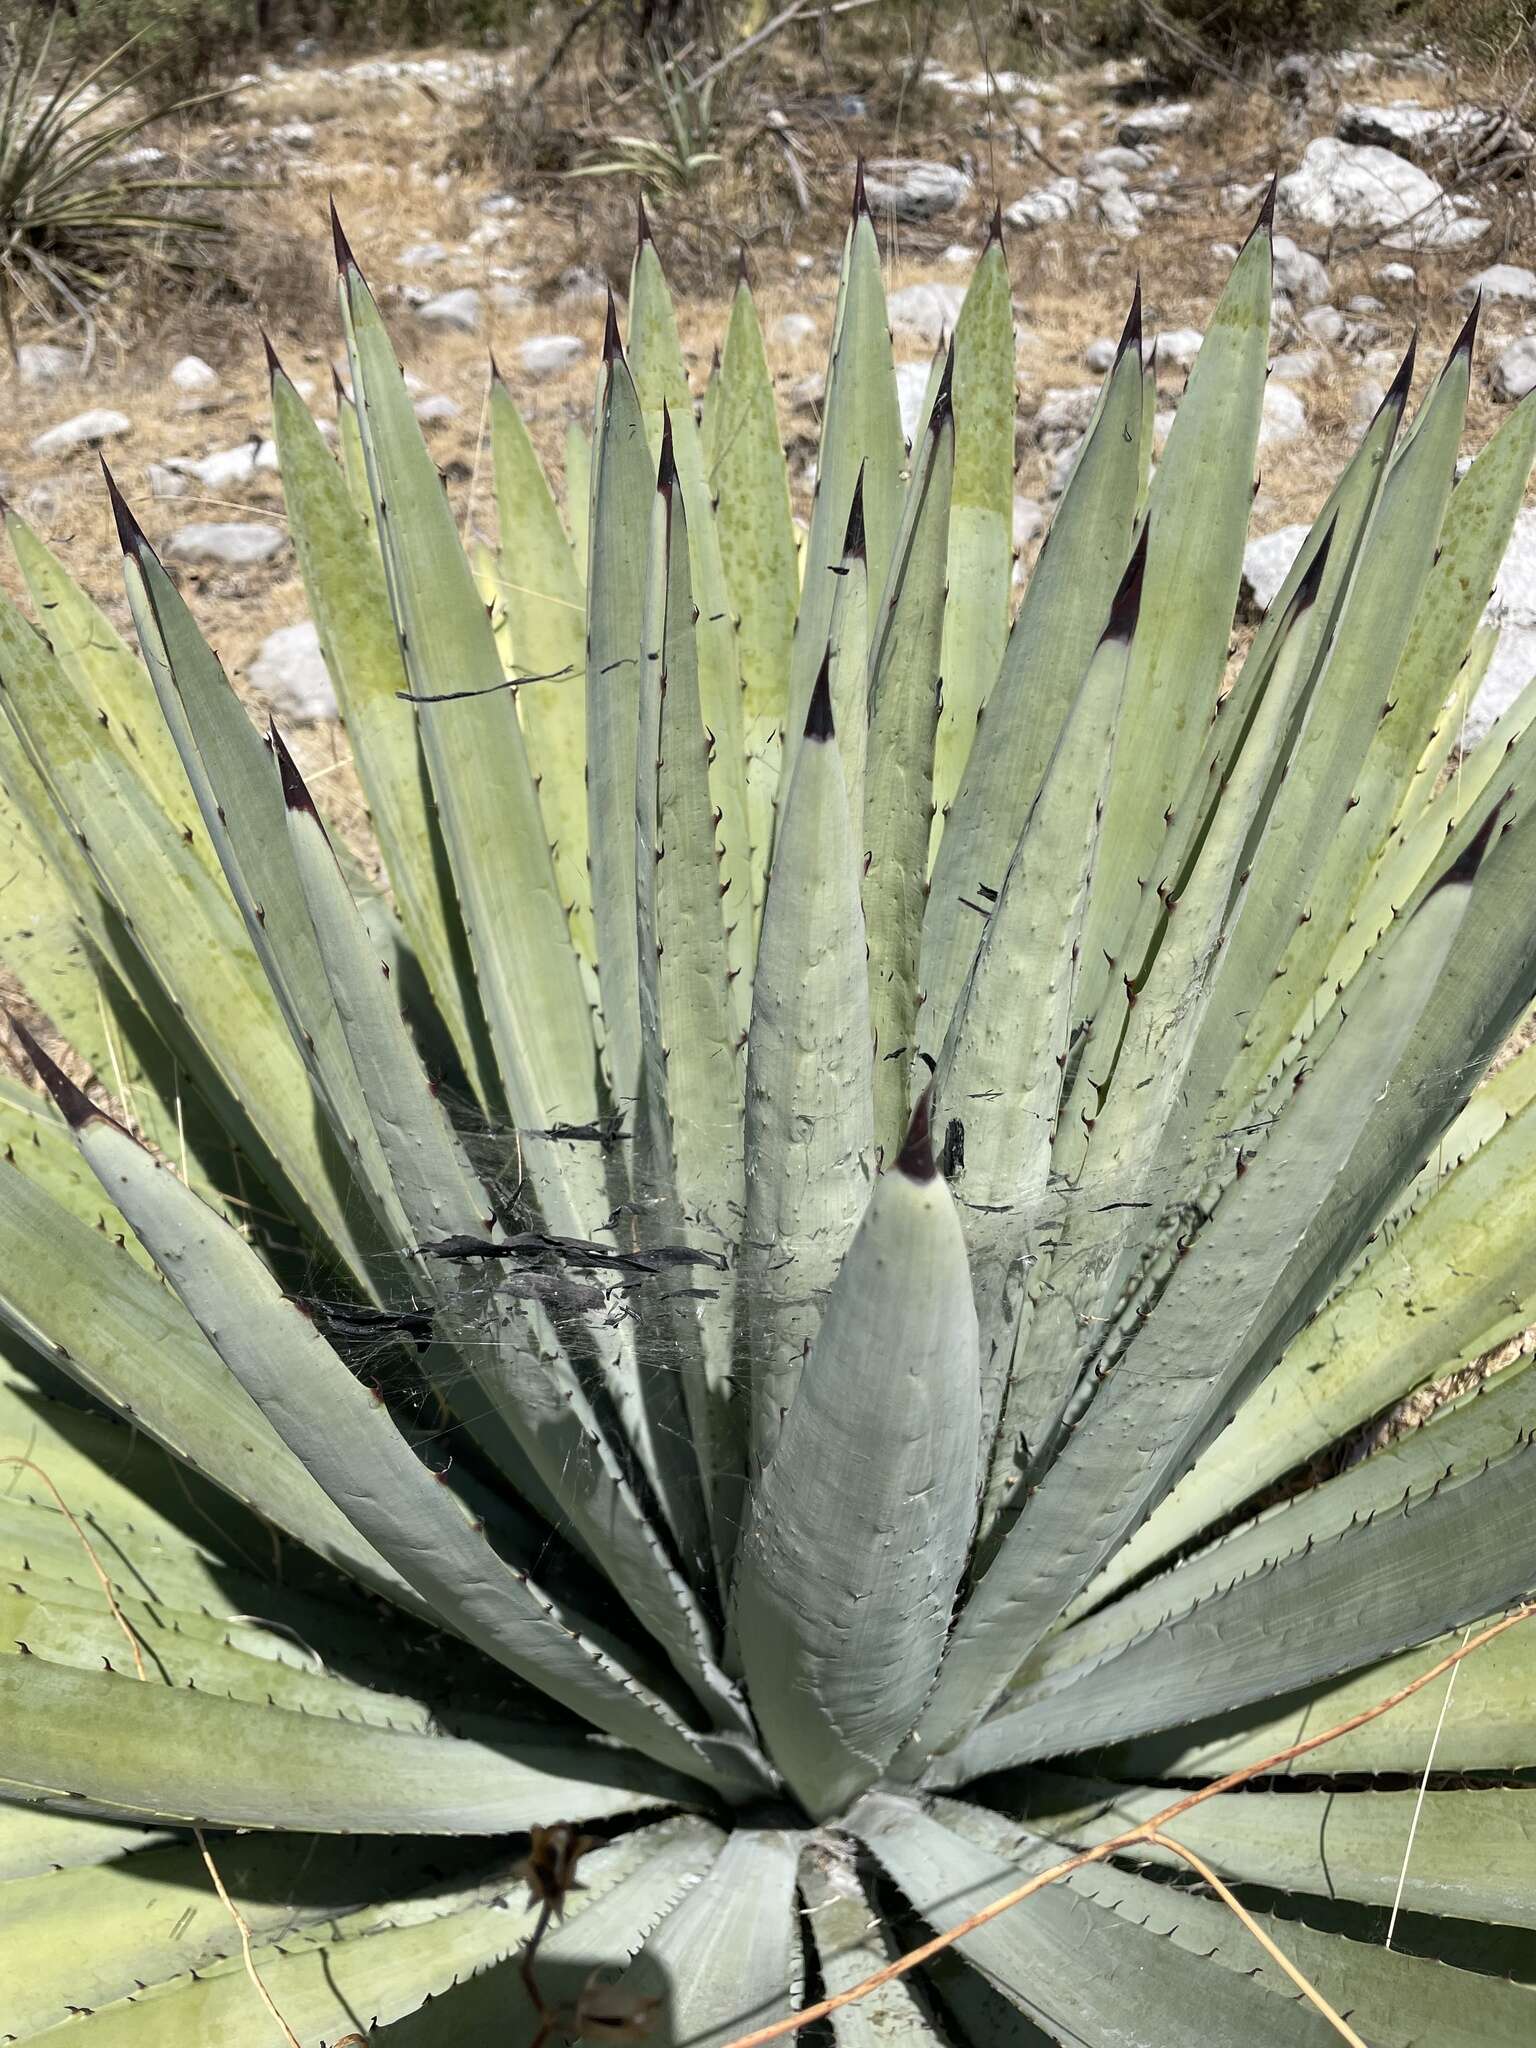 Image of Agave collina Greenm.